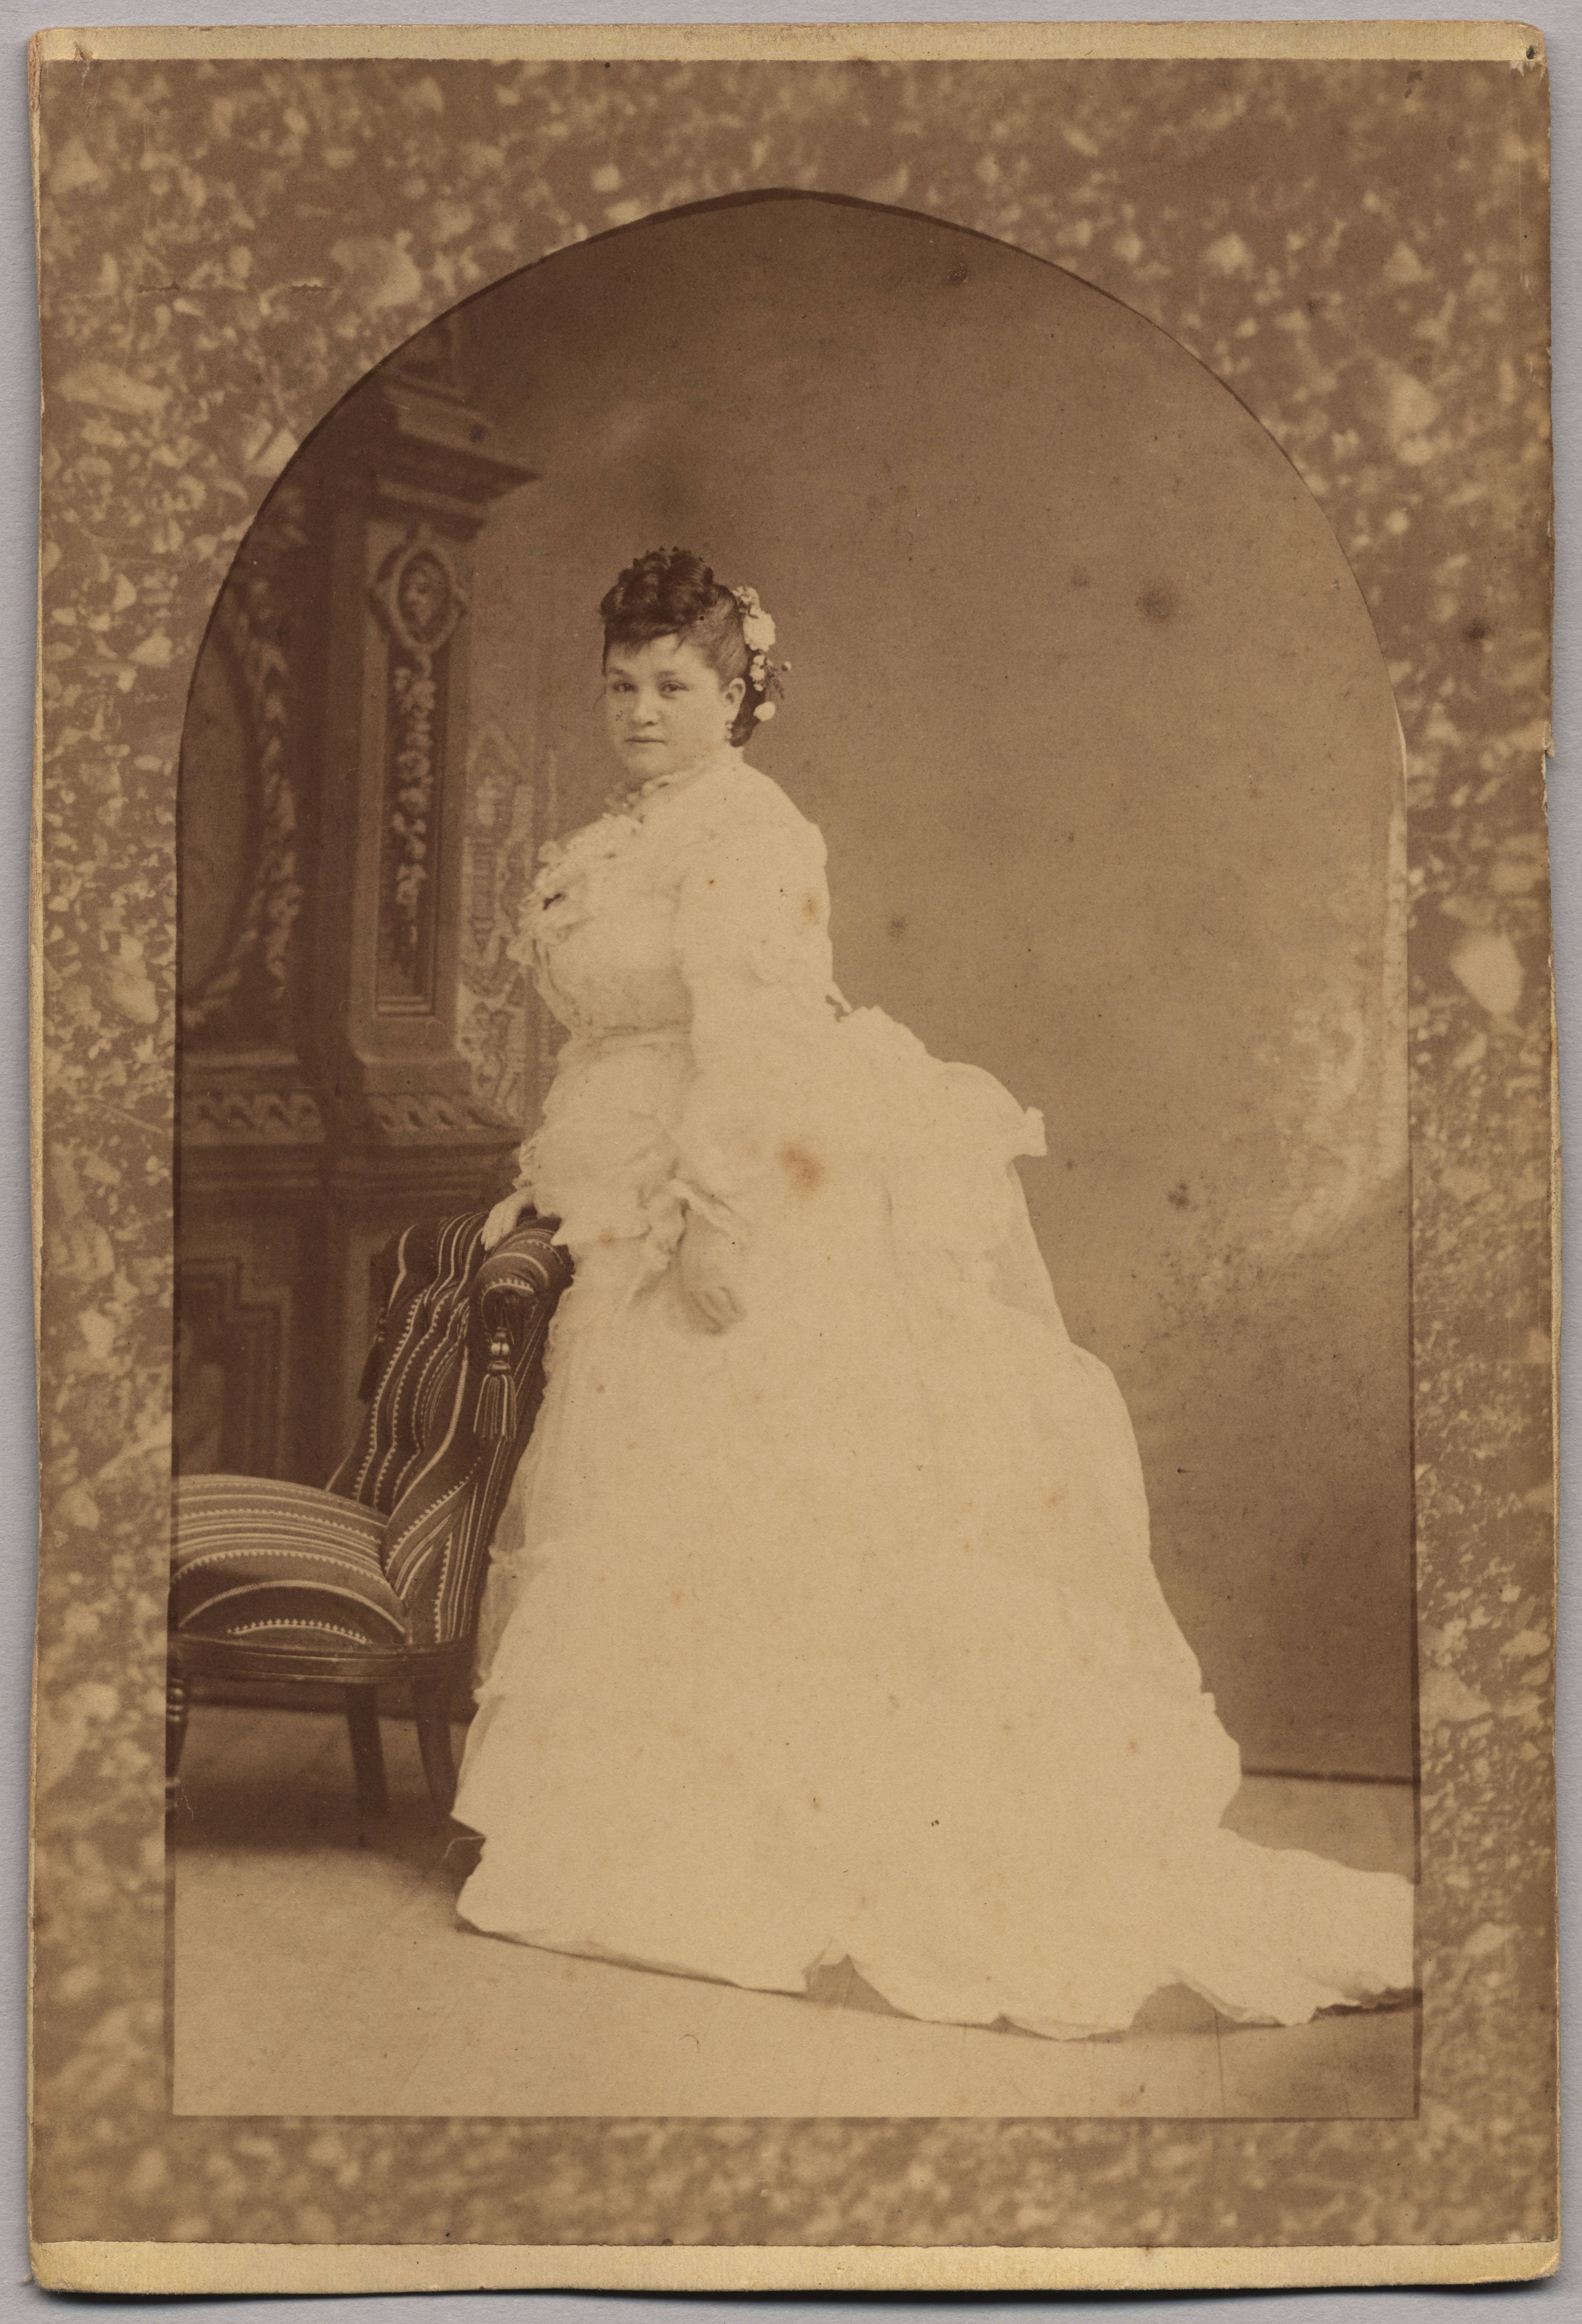 A sepia-toned portrait of a woman in a long white dress from around 1870.